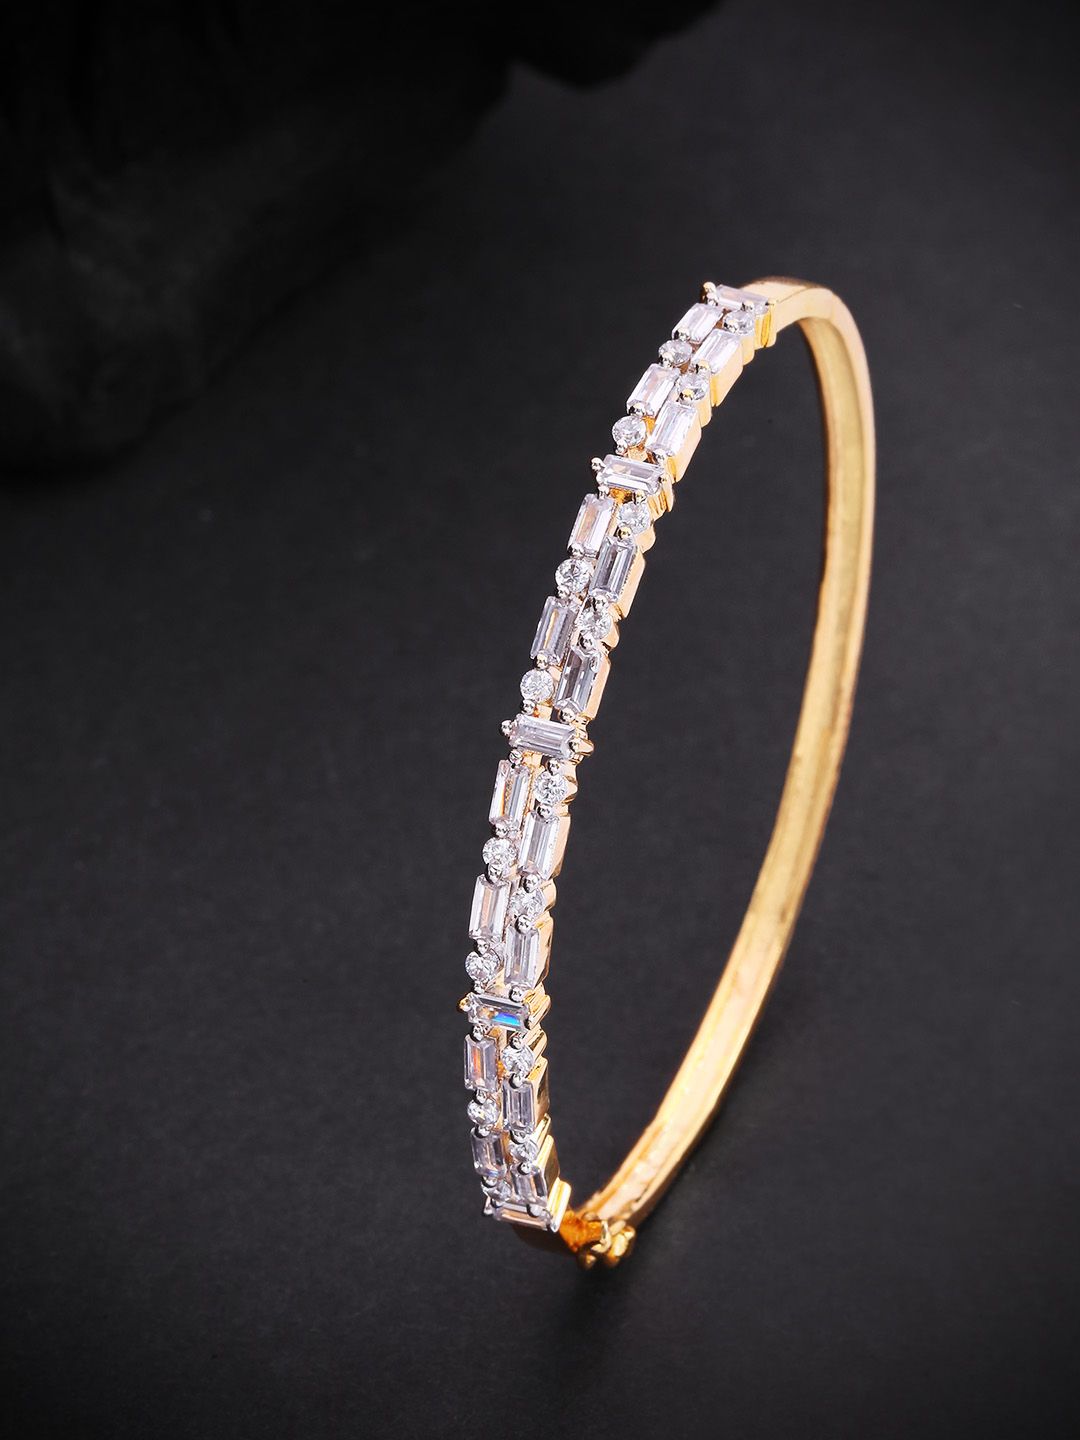 Priyaasi Gold-Plated AD-Studded Handcrafted Bangle Style Bracelet Price in India